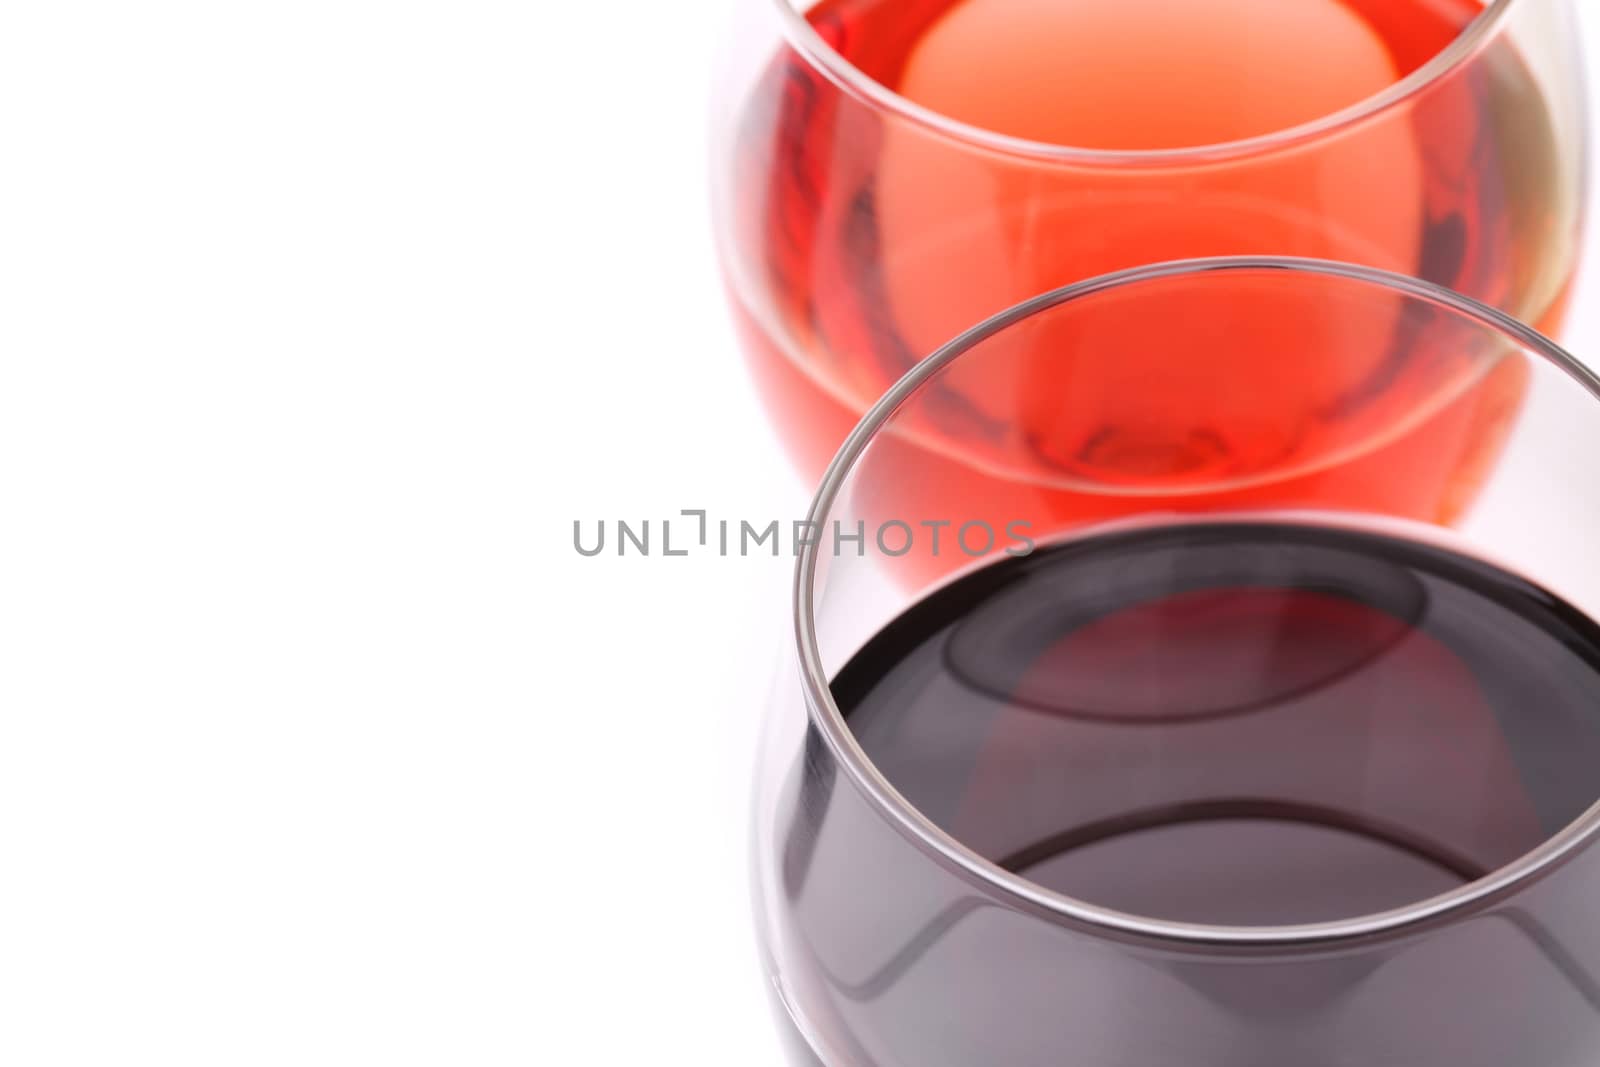 Glasses of wine view from above close-up by indigolotos